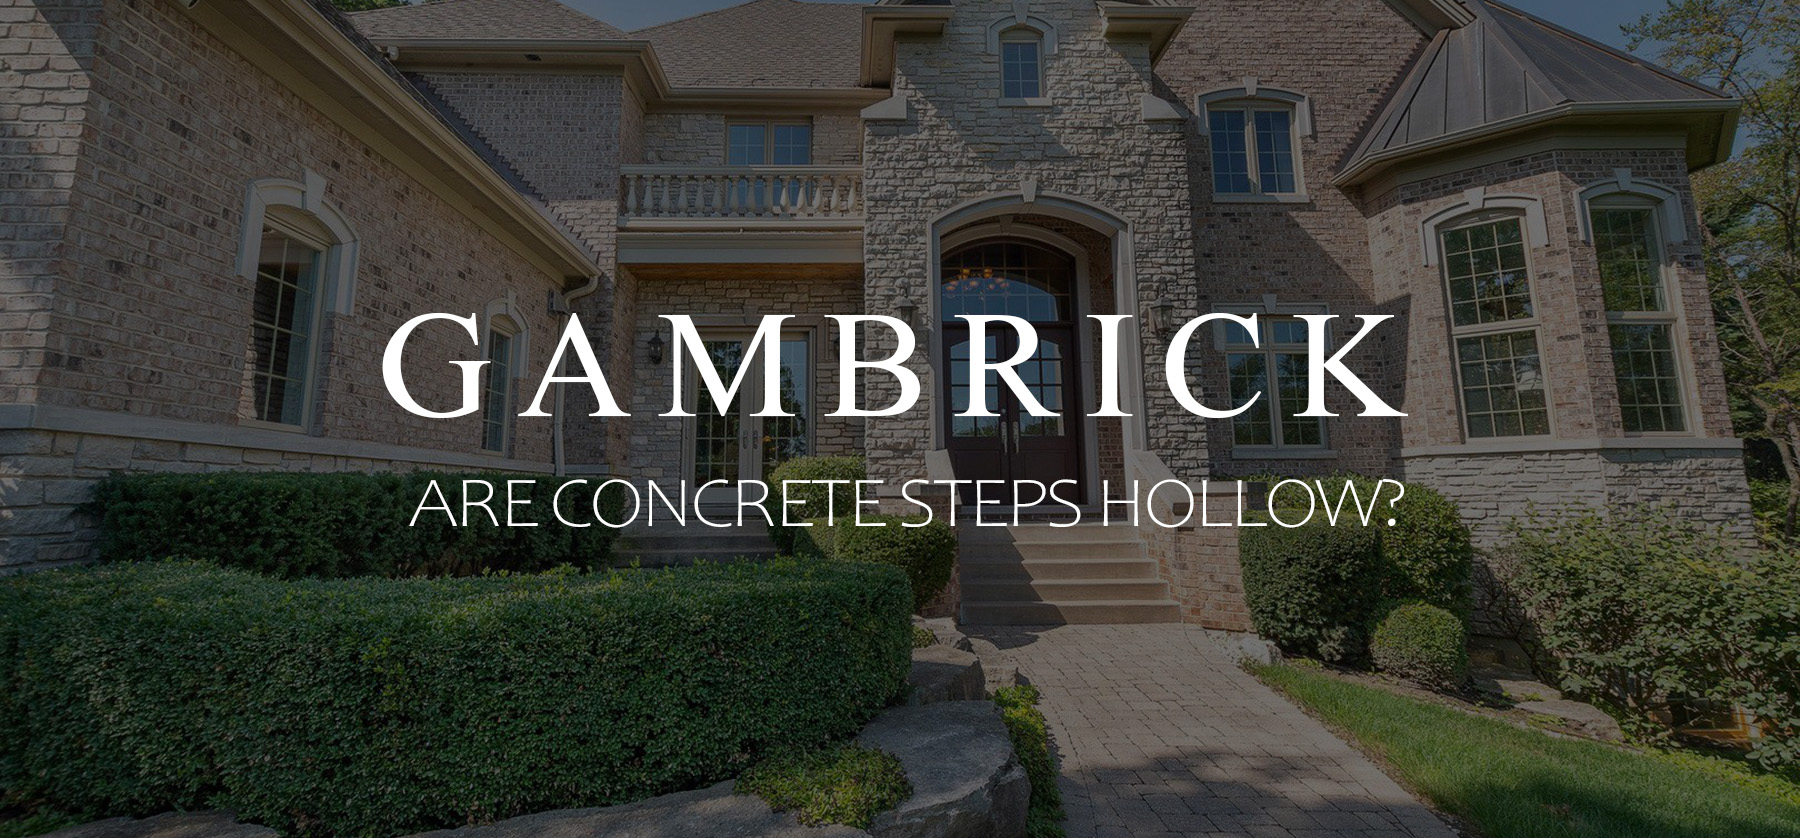 are concrete steps hollow banner